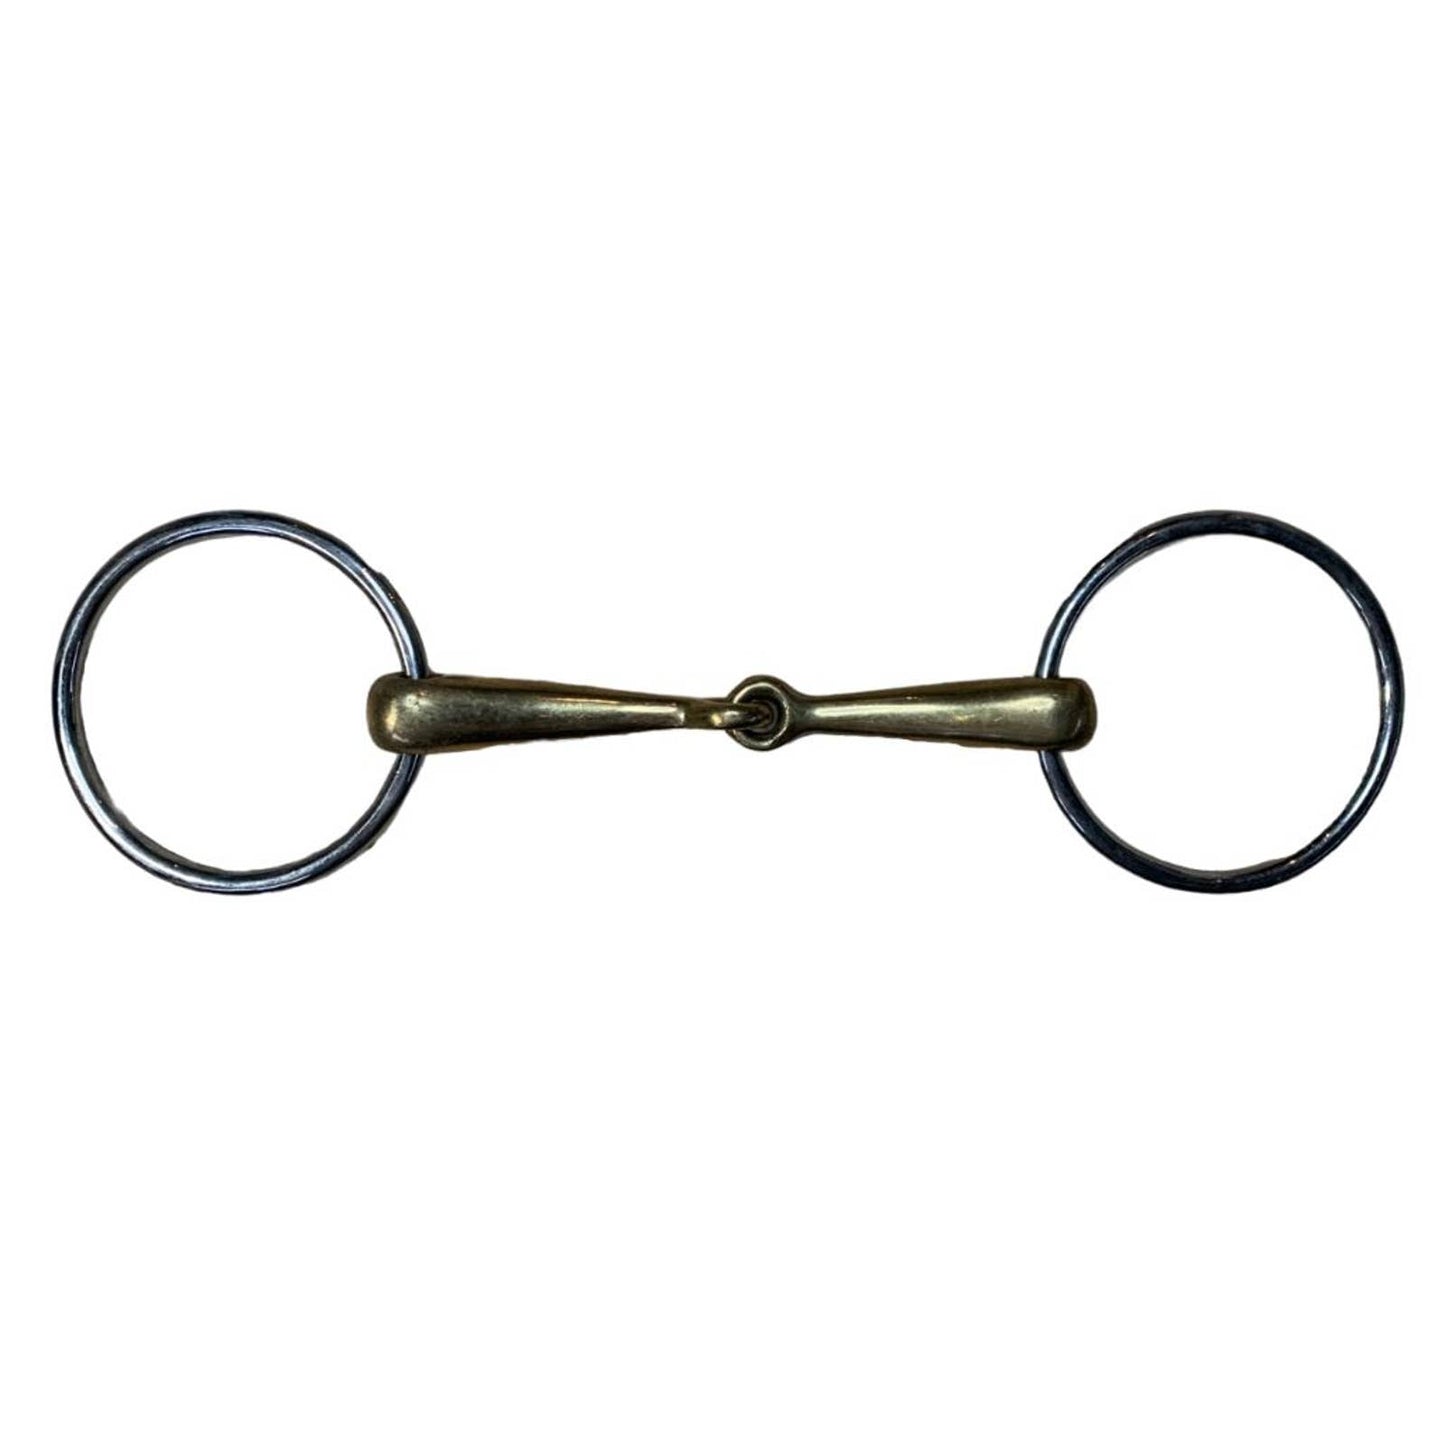 Stubben Loose Ring Snaffle in Copper - 5"